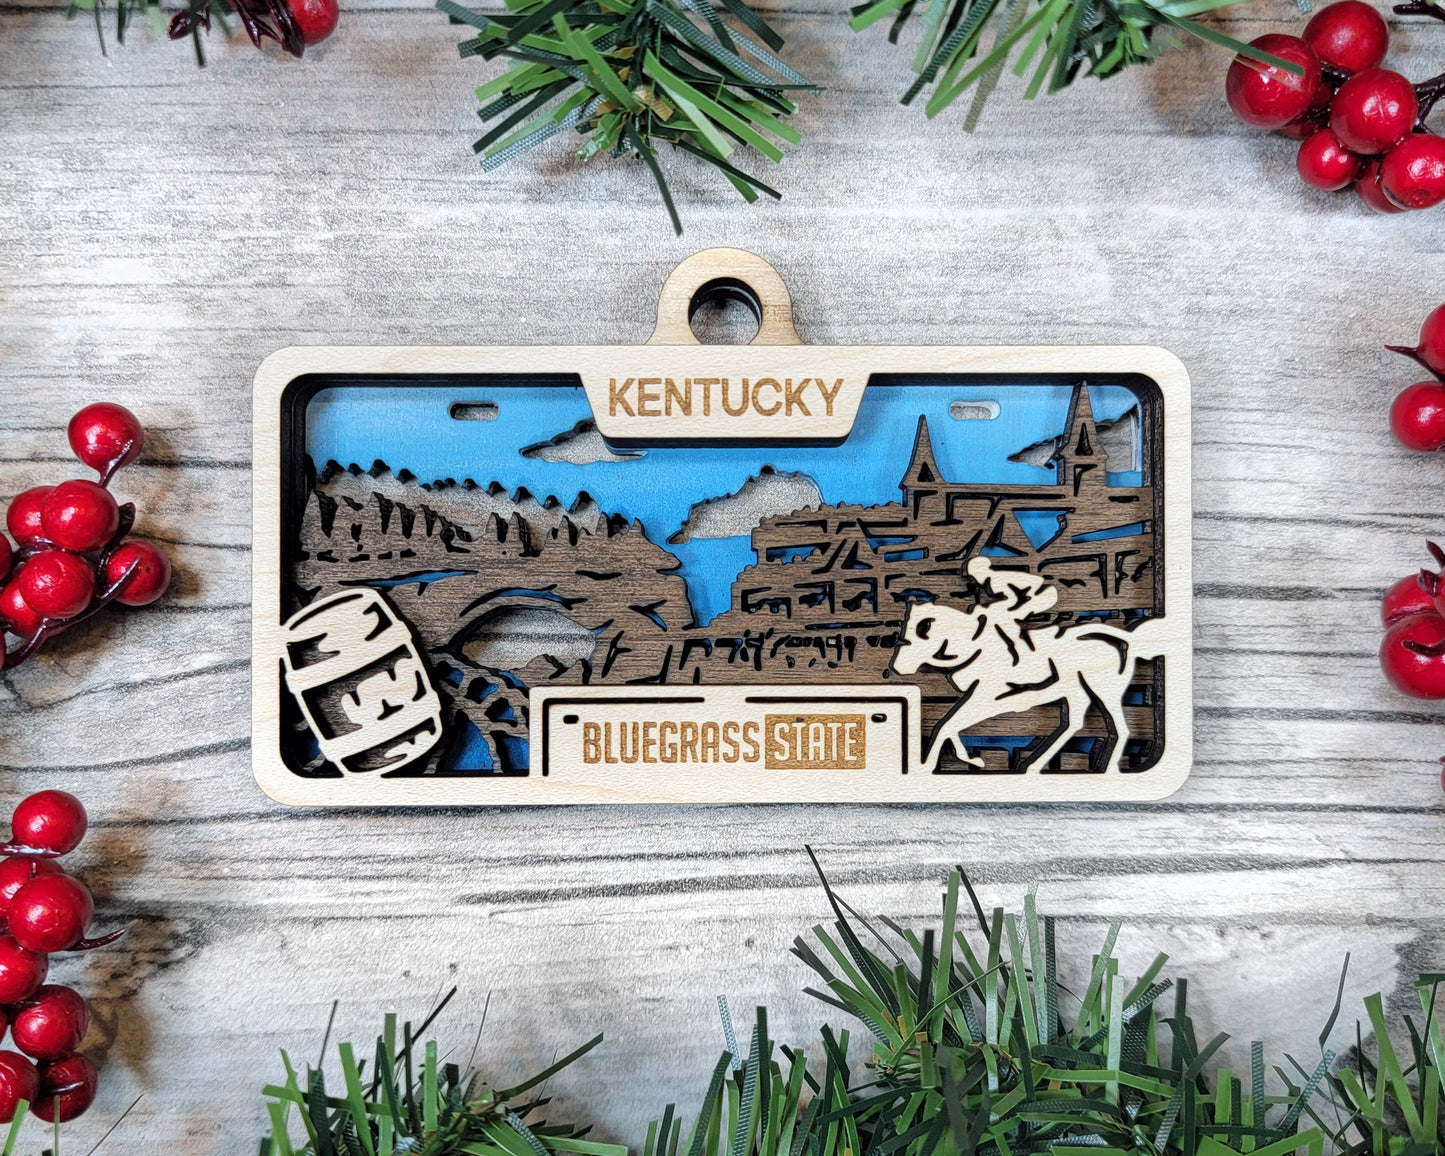 Kentucky State Plate Ornament and Signage - SVG File Download - Sized for Glowforge - Laser Ready Digital Files